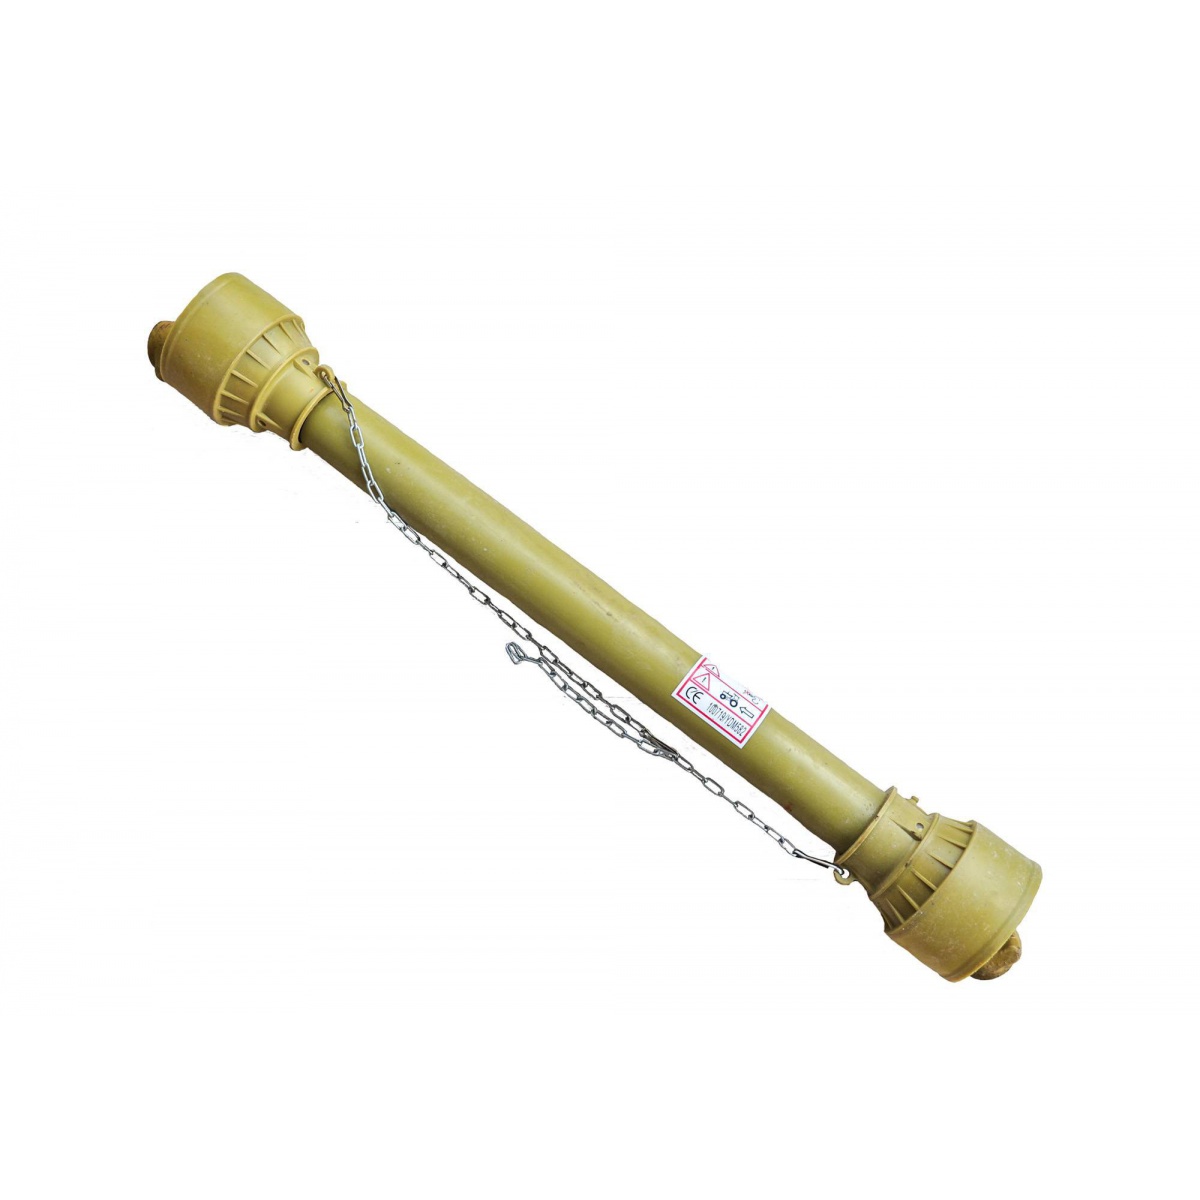 025b up to 24km and 130nm - PTO shaft 025B - 70cm / up to 24 HP